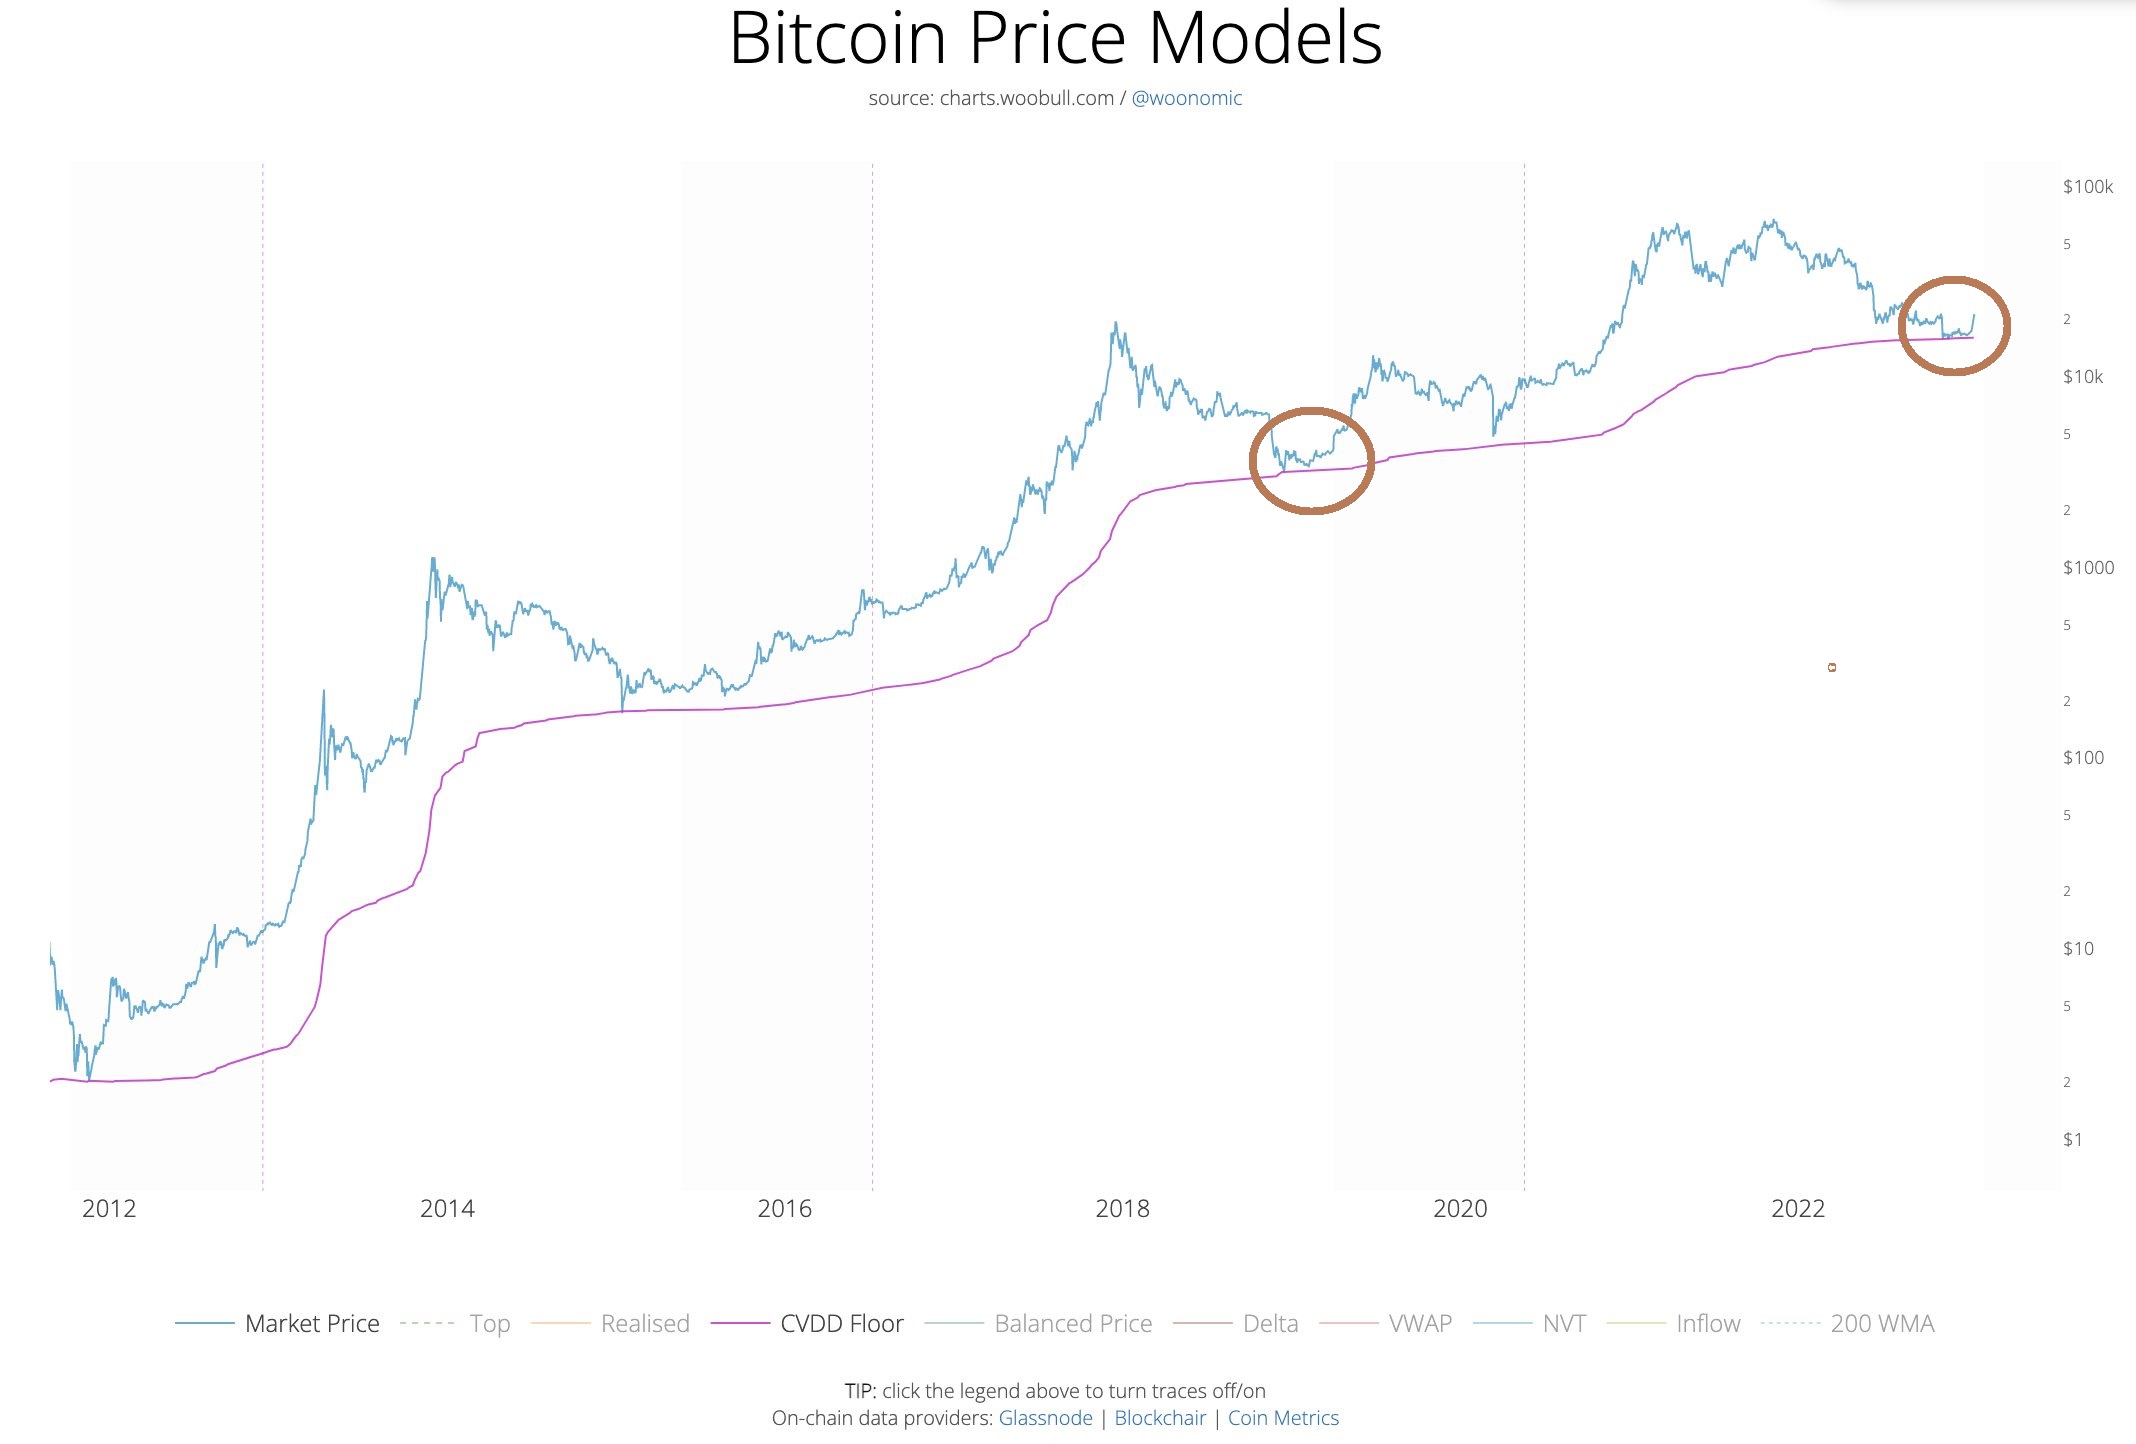 Bitcoin pricing model